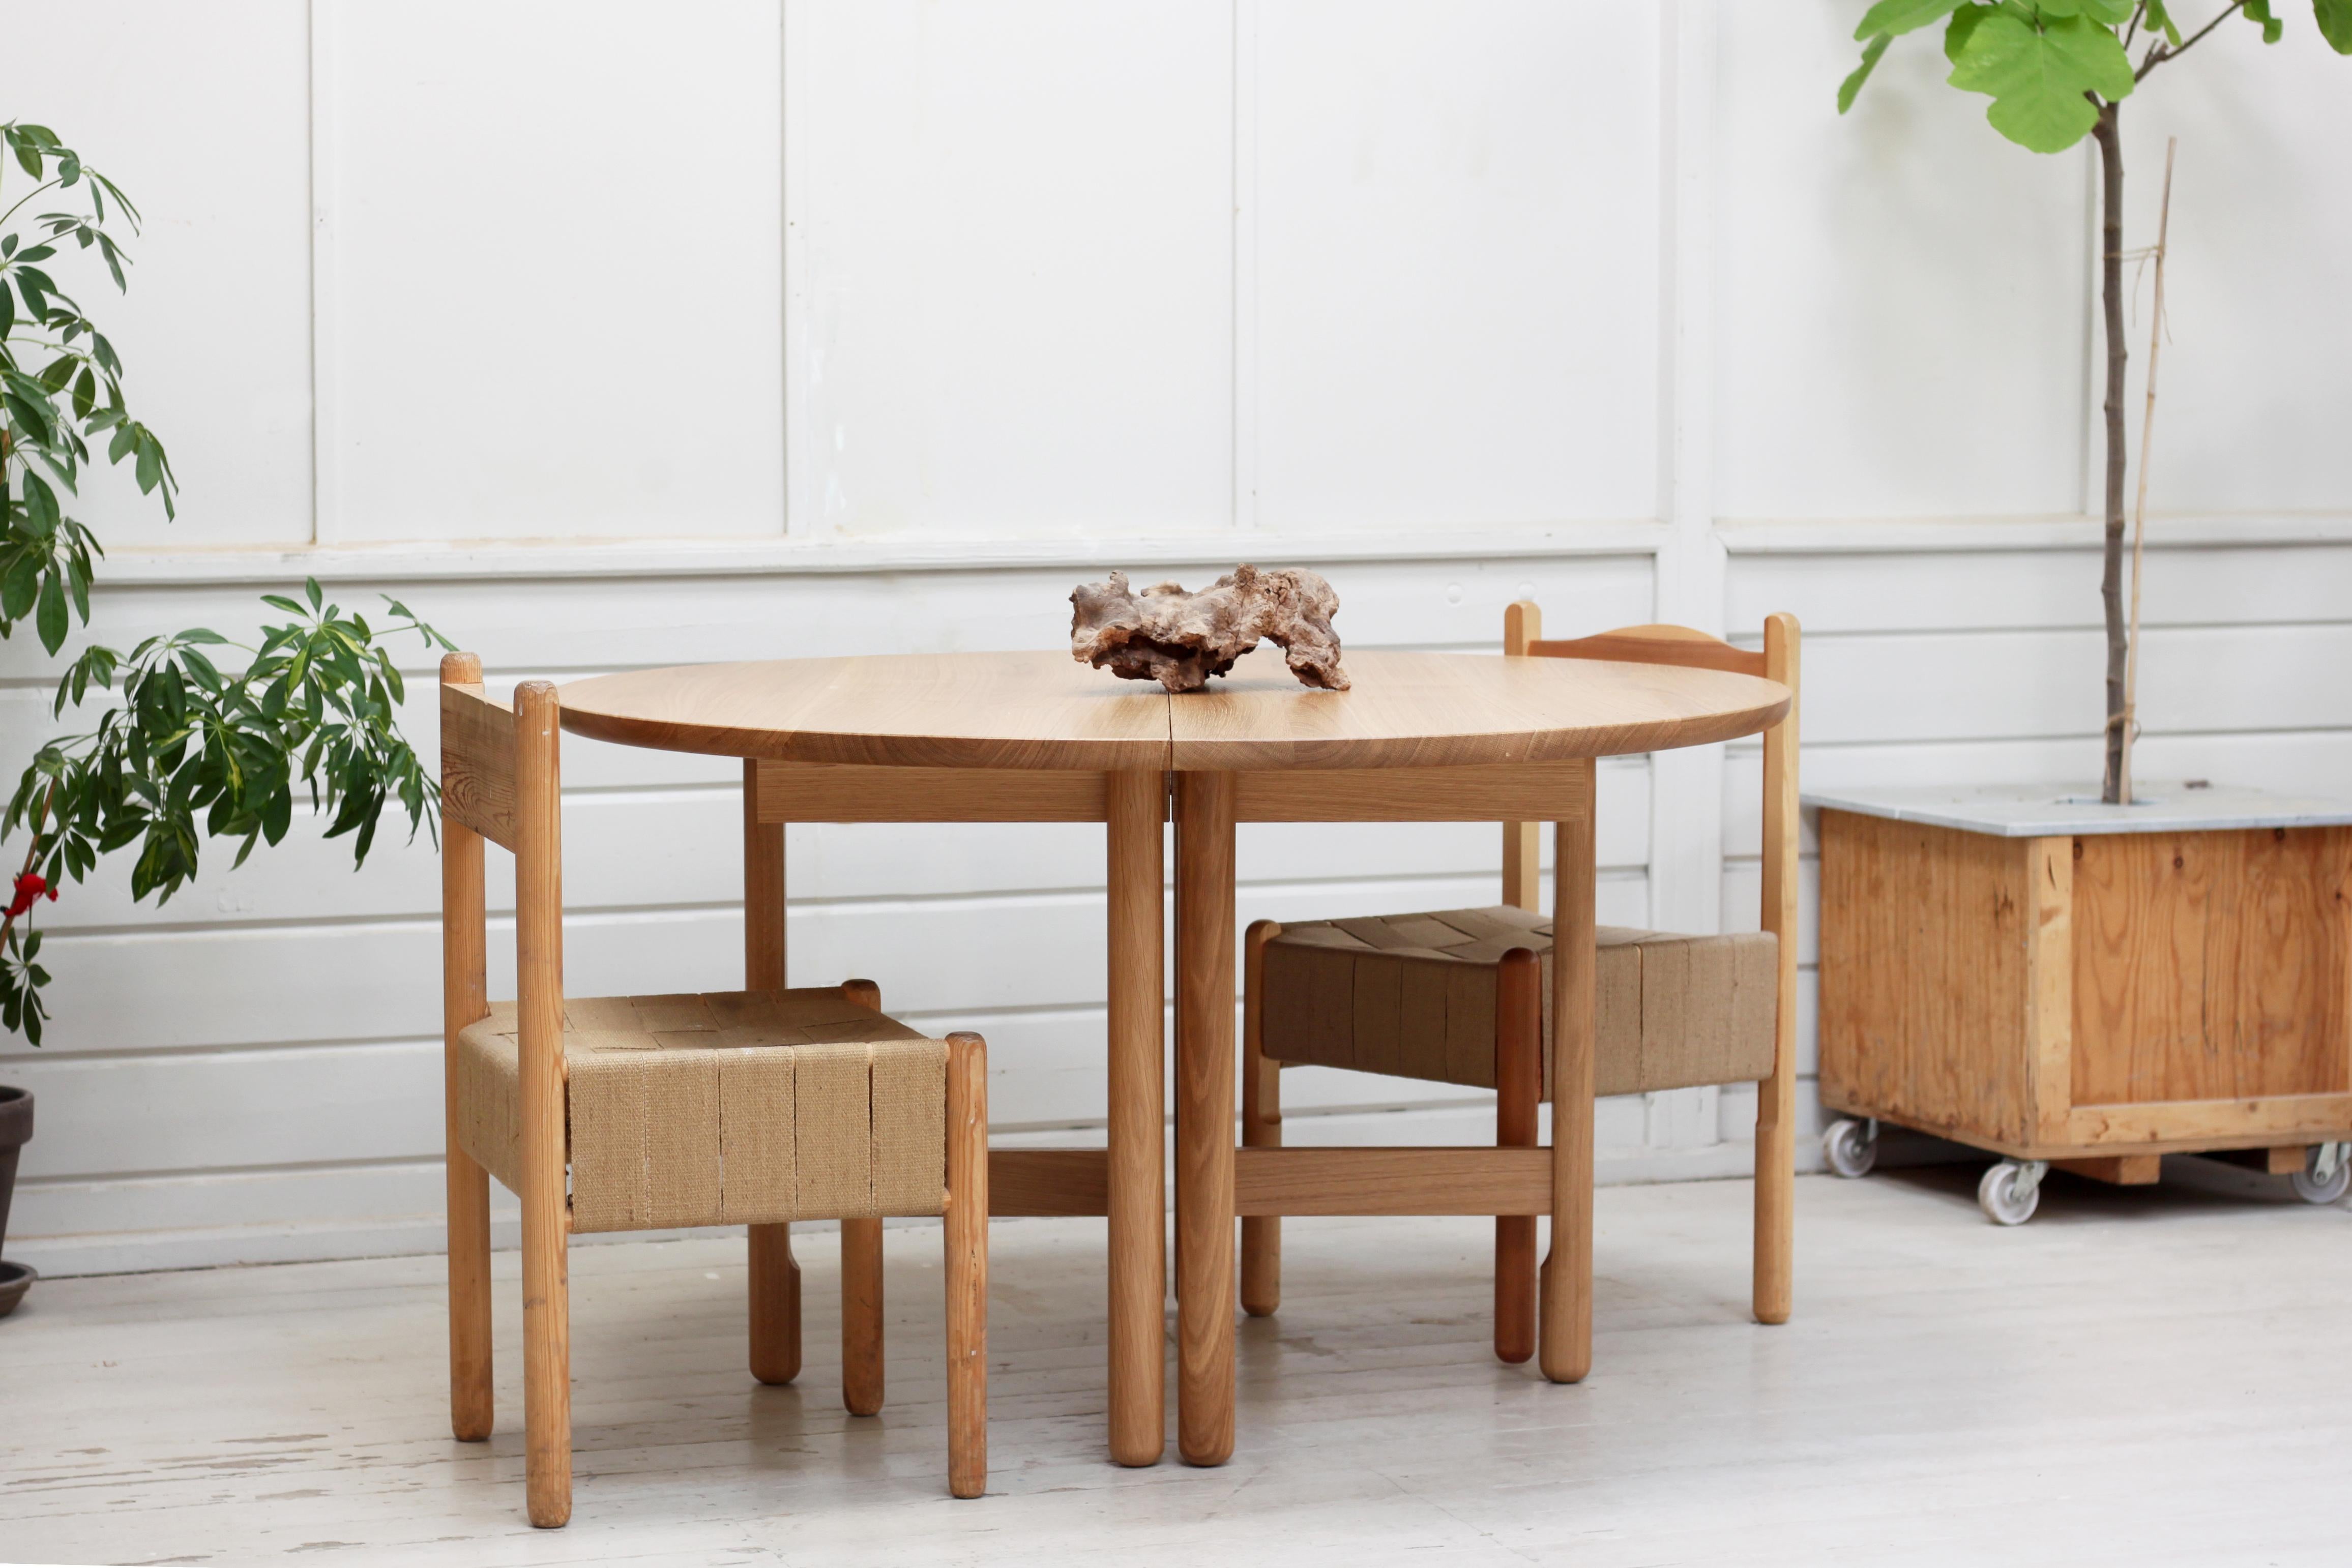 Handmade Thea Dining Table, Extendable Ø130cm - Oak - by BACD studio In New Condition For Sale In Værløse, DK